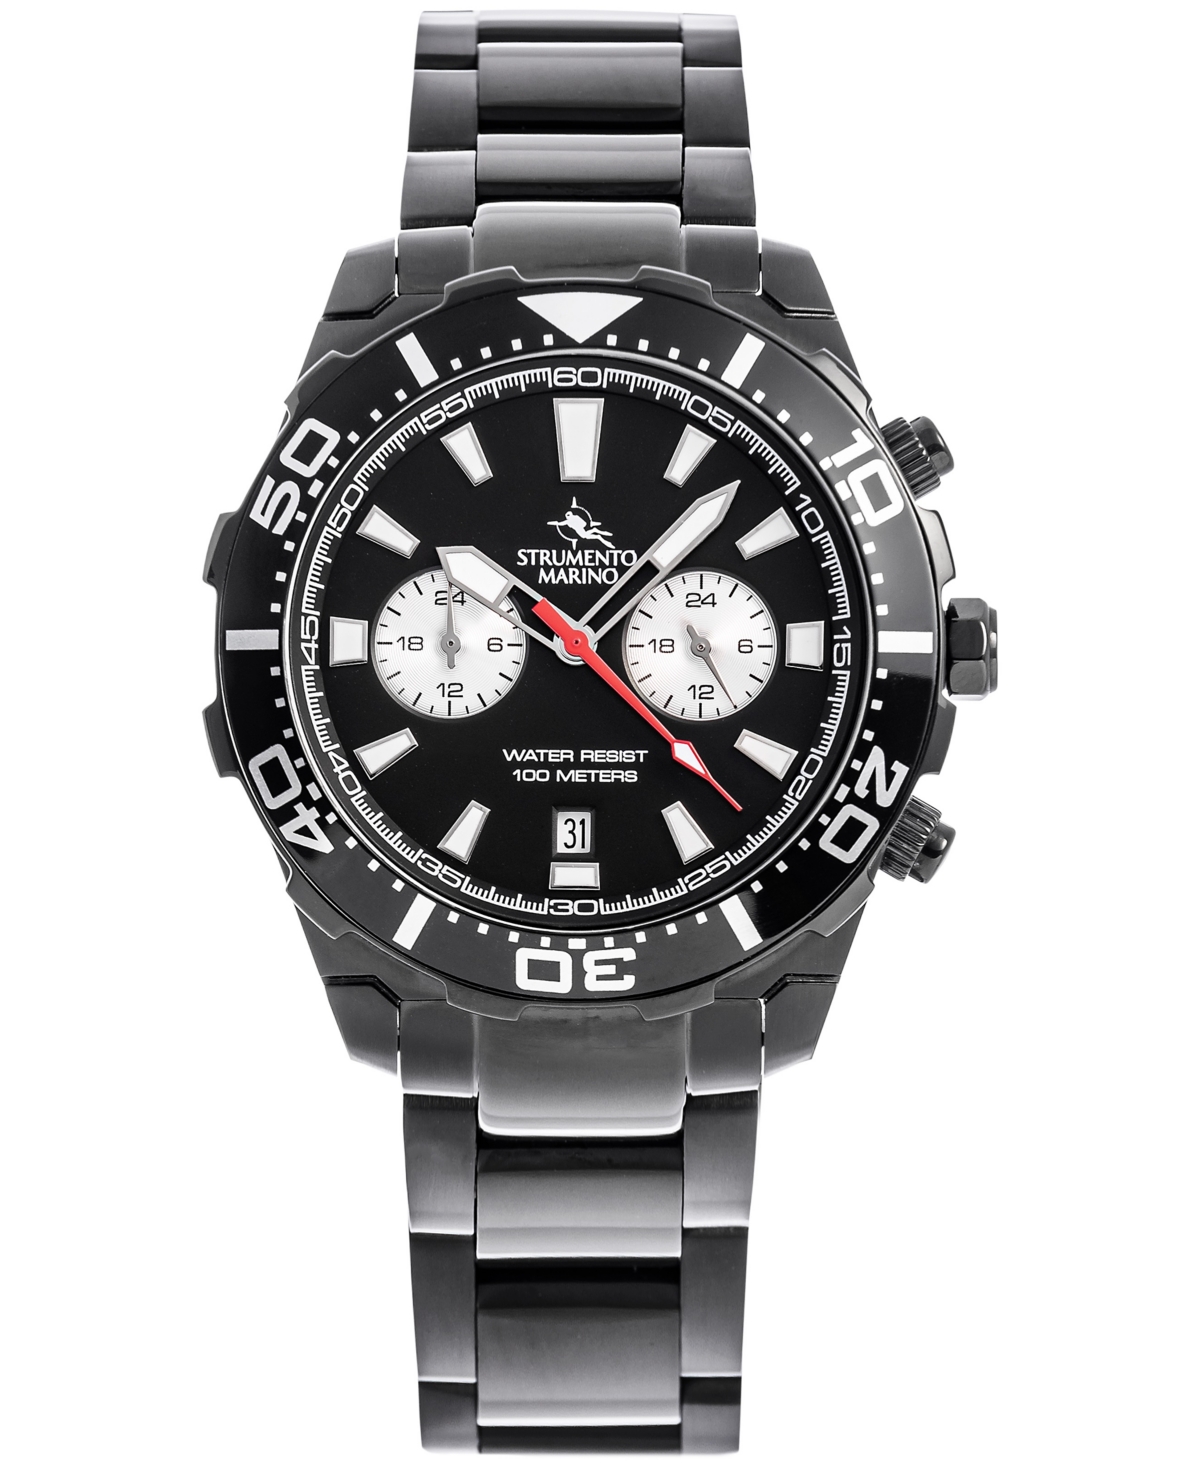 Men's Dual Time Zone Skipper Black Pvd Stainless Steel Bracelet Watch 44mm, Created for Macy's - Black Pvd  Black Dial